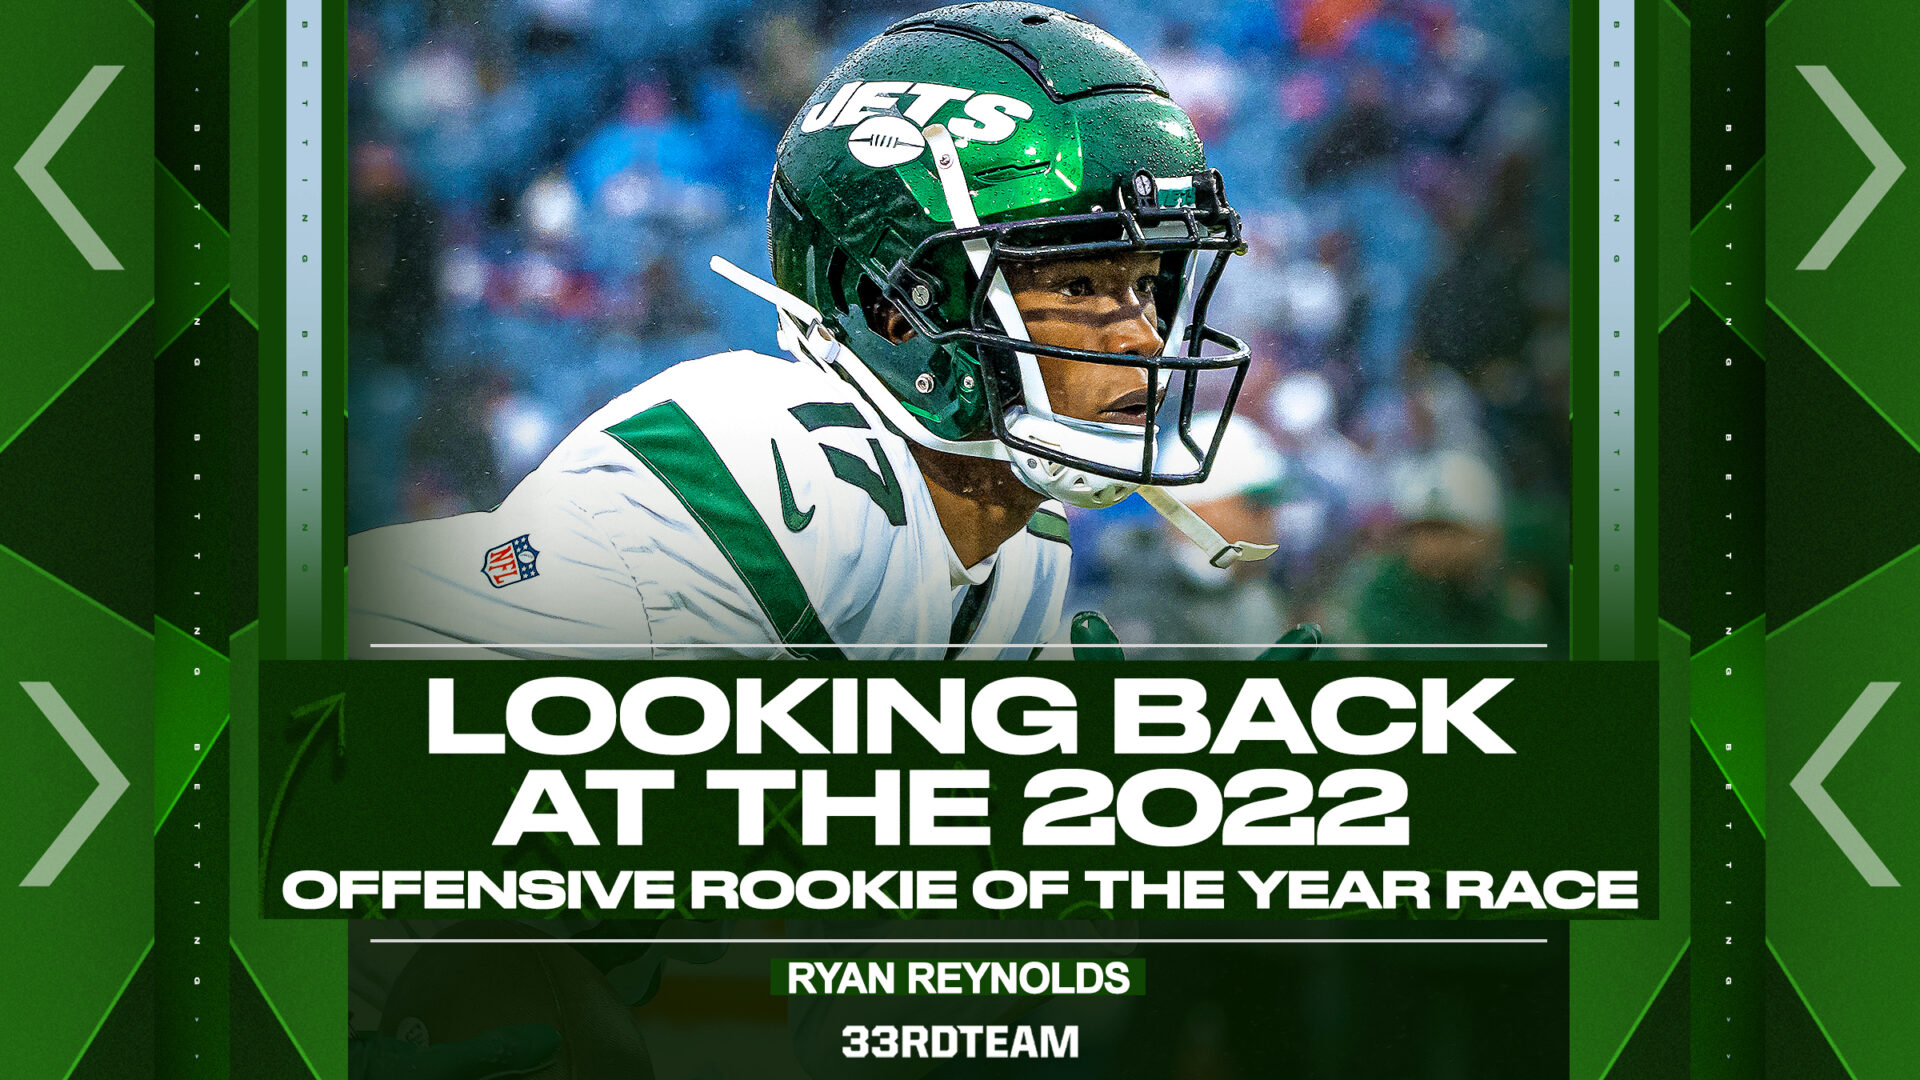 Looking Back at the 2022 Offensive Rookie of the Year Race